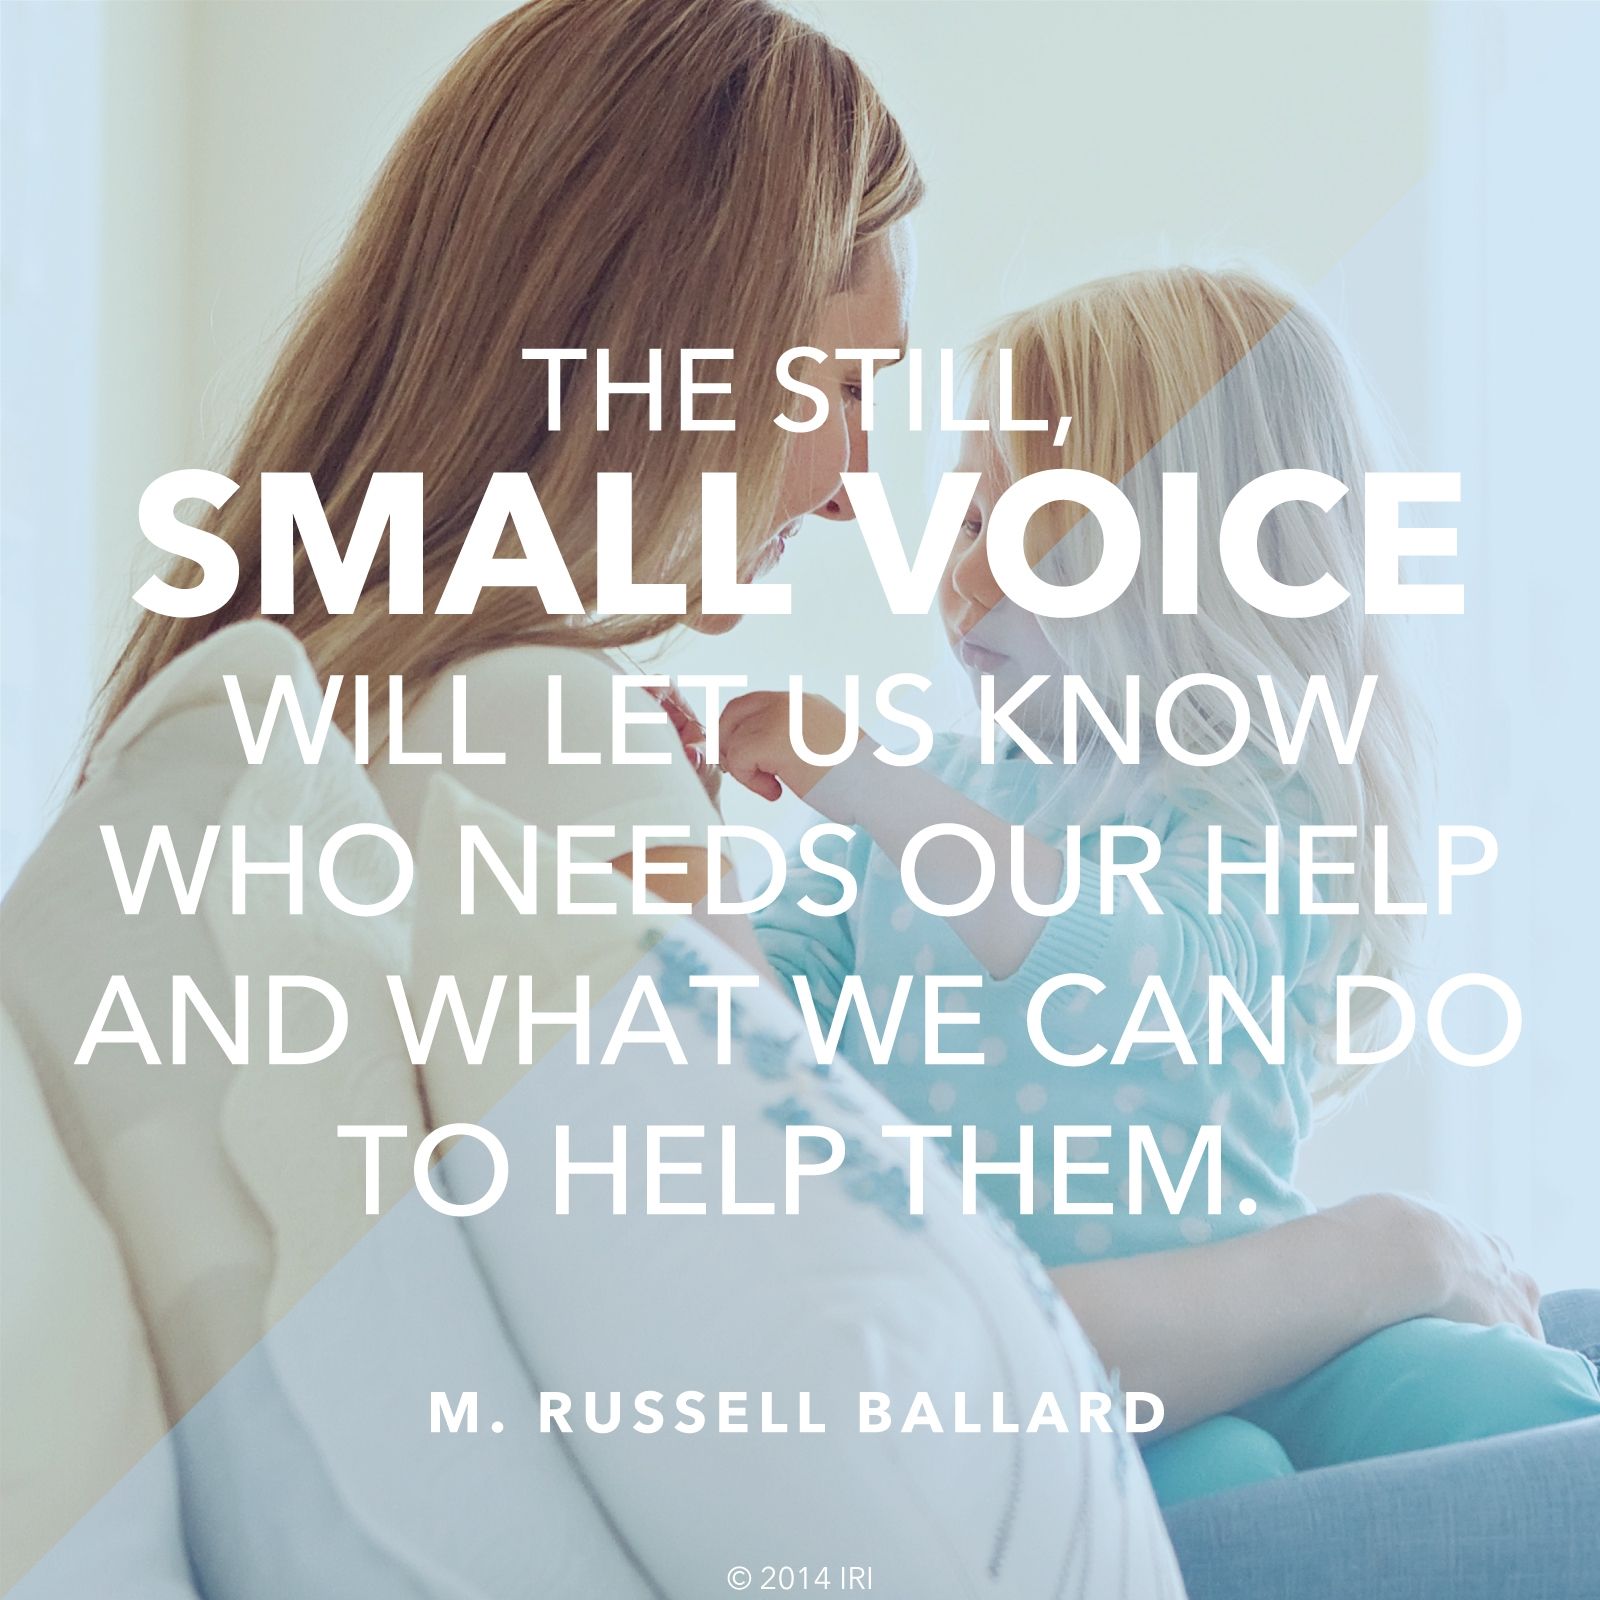 “The still, small voice will let us know who needs our help and what we can do to help them.”—Elder M. Russell Ballard, “Finding Joy through Loving Service” © undefined ipCode 1.